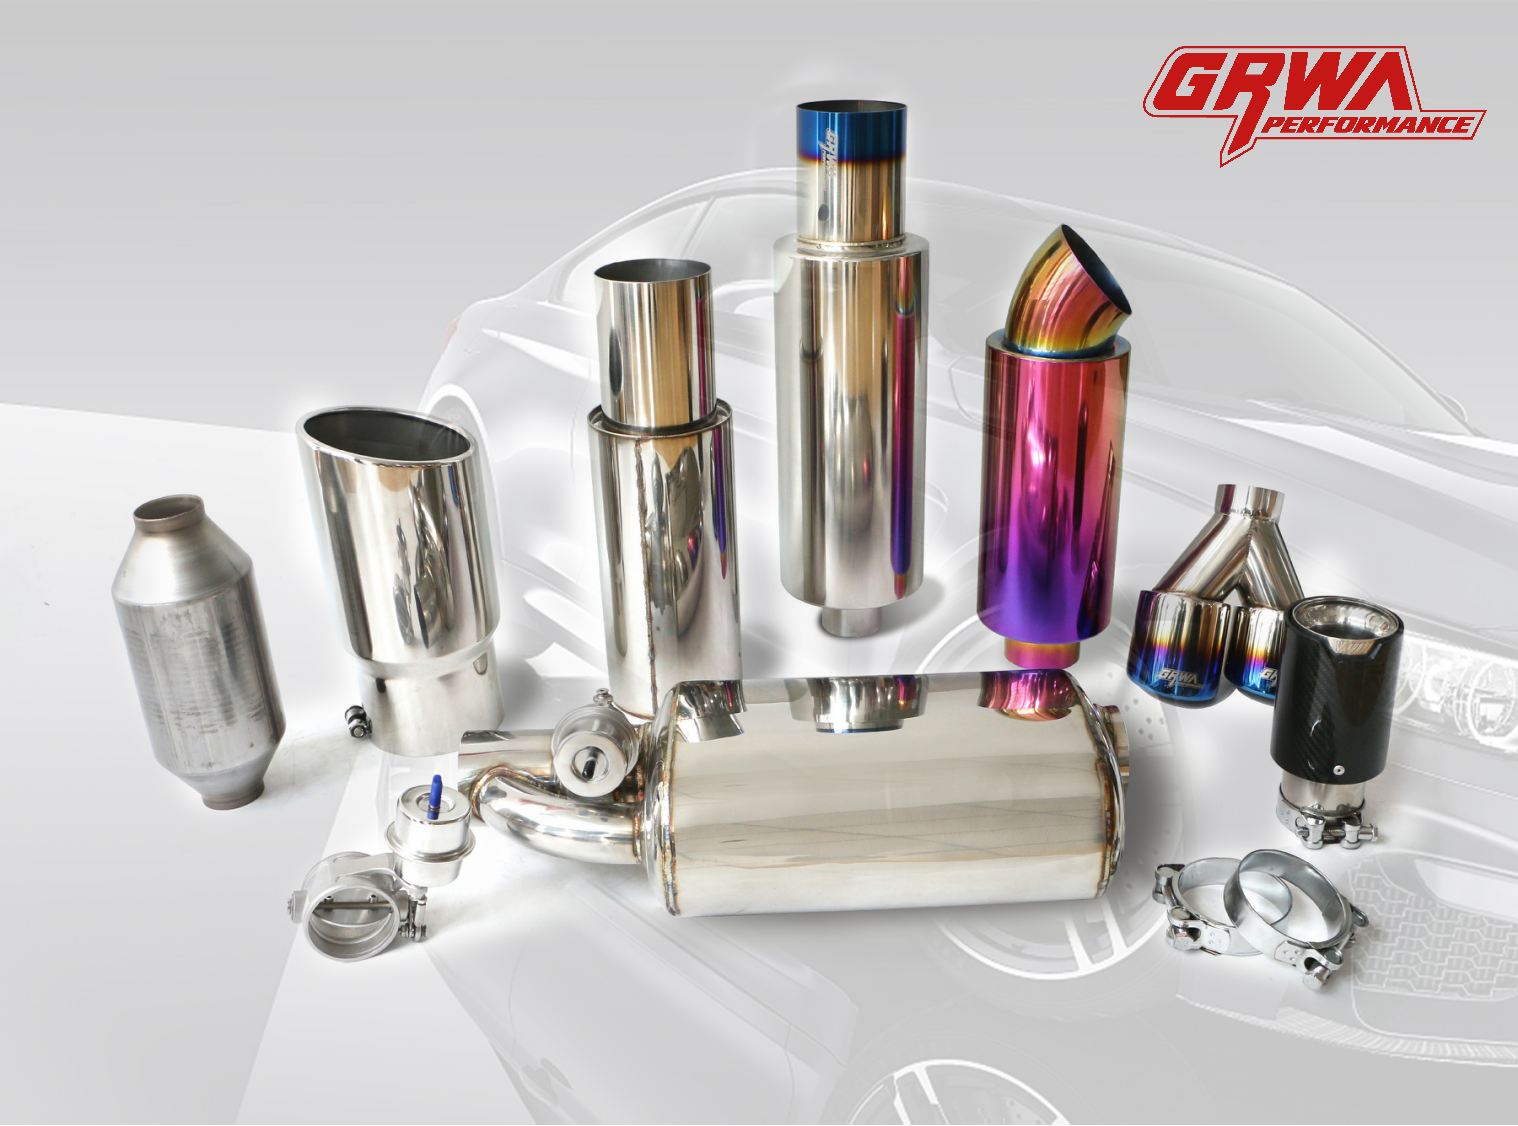 #New Year Hot Sale# Exhaust System and Modified Exhaust， GRWA2022 starts, and the series of products are on sale!（2）